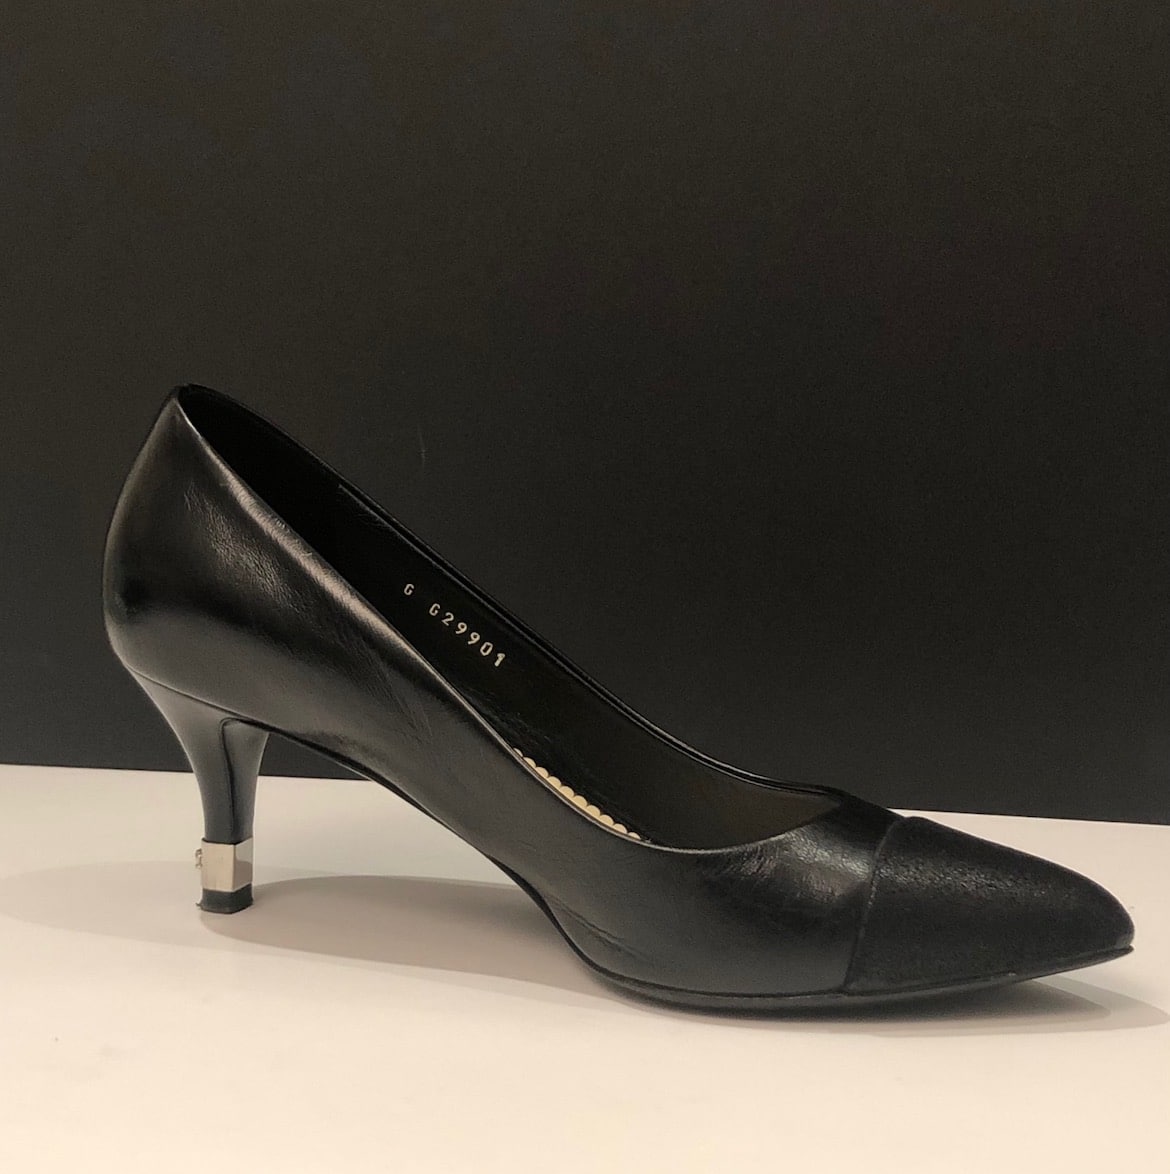 Louis Feraud - Authenticated Heel - Patent Leather Black Plain For Woman, Never Worn, with Tag